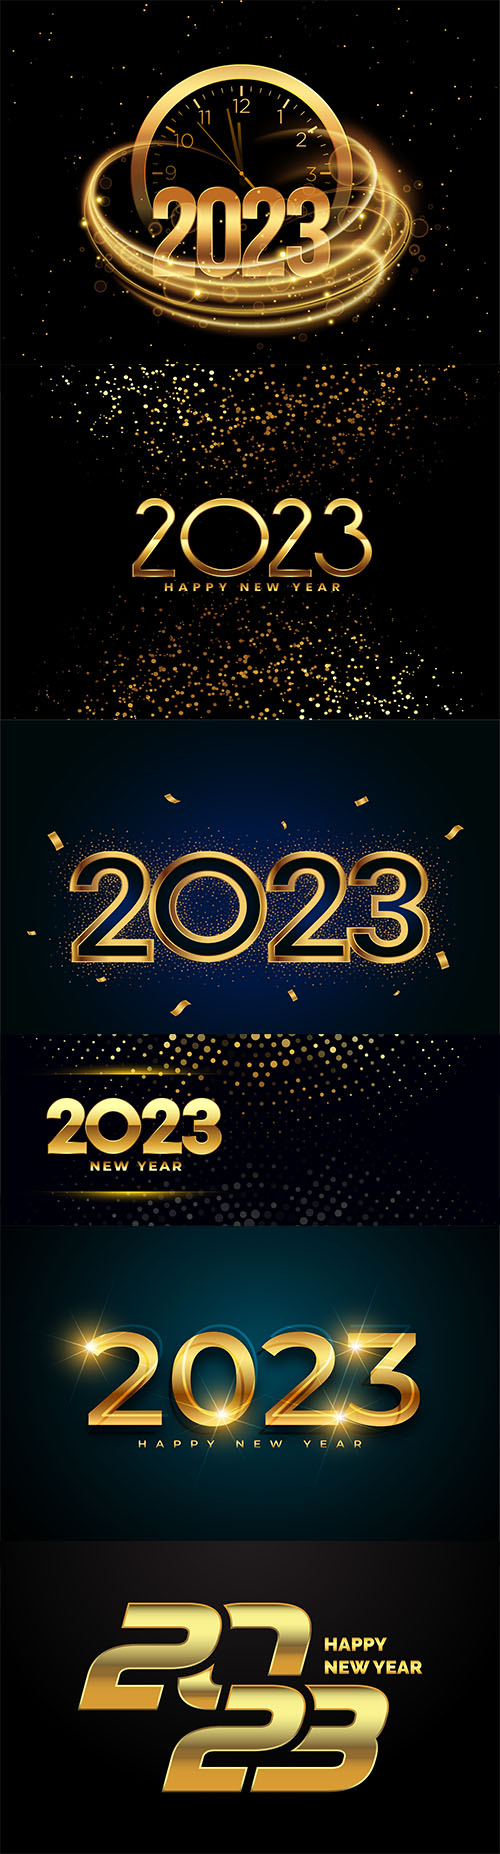 2023 new year wishes vector card with golden confetti and sparkle